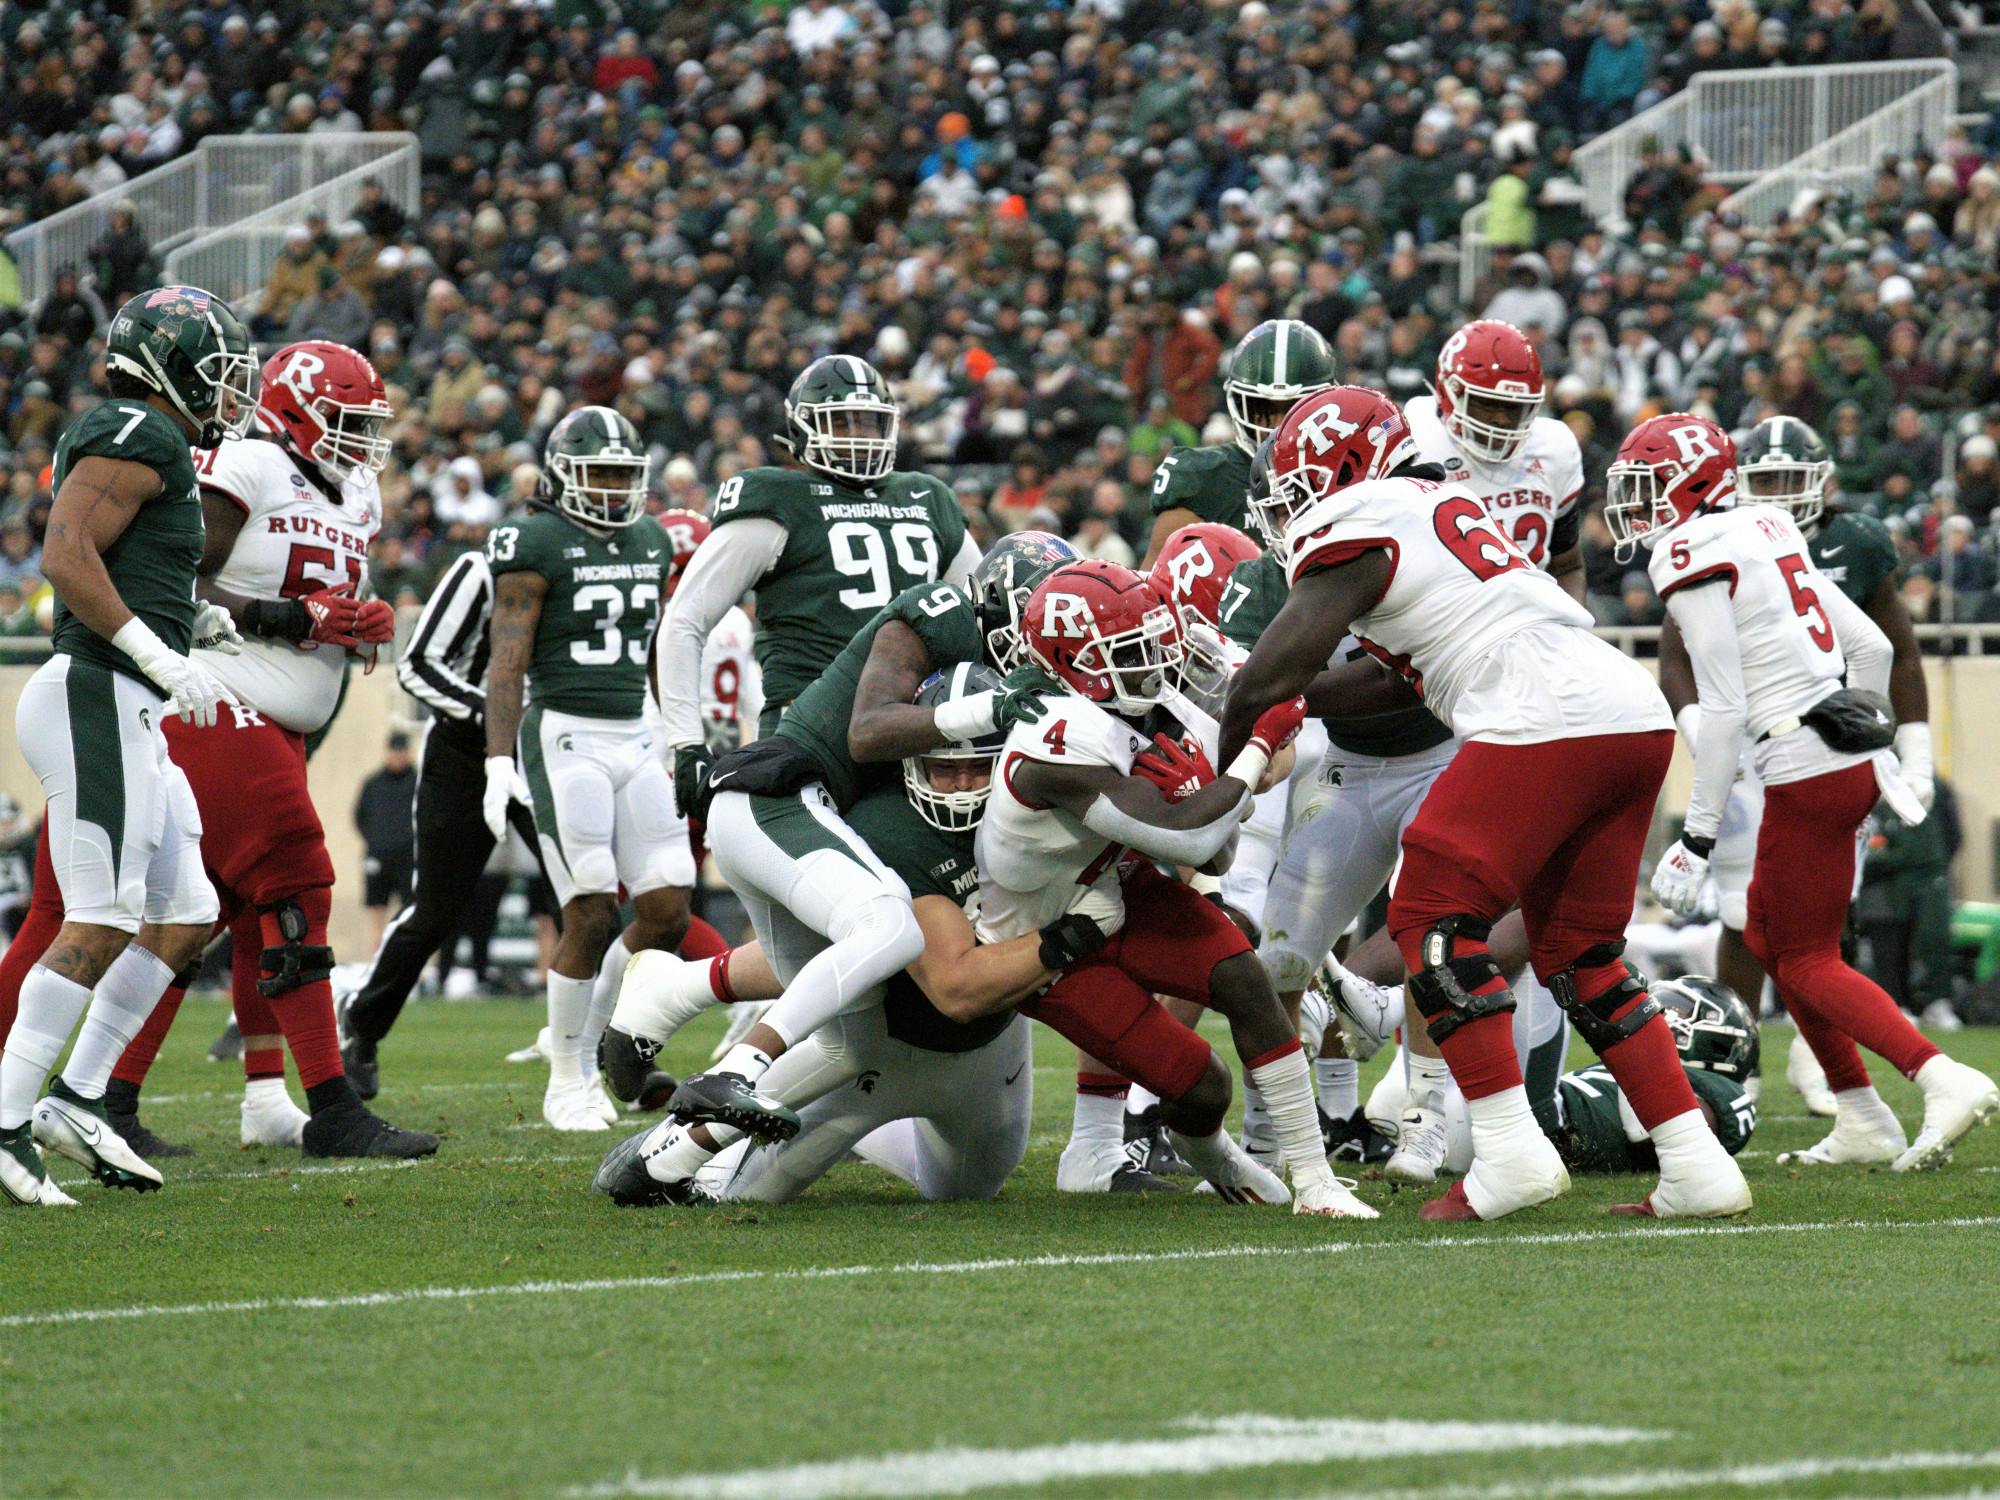 <p>Spartan defense blocks a Rutgers offensive drive down the field during the match on Nov. 12, 2022. ﻿</p>